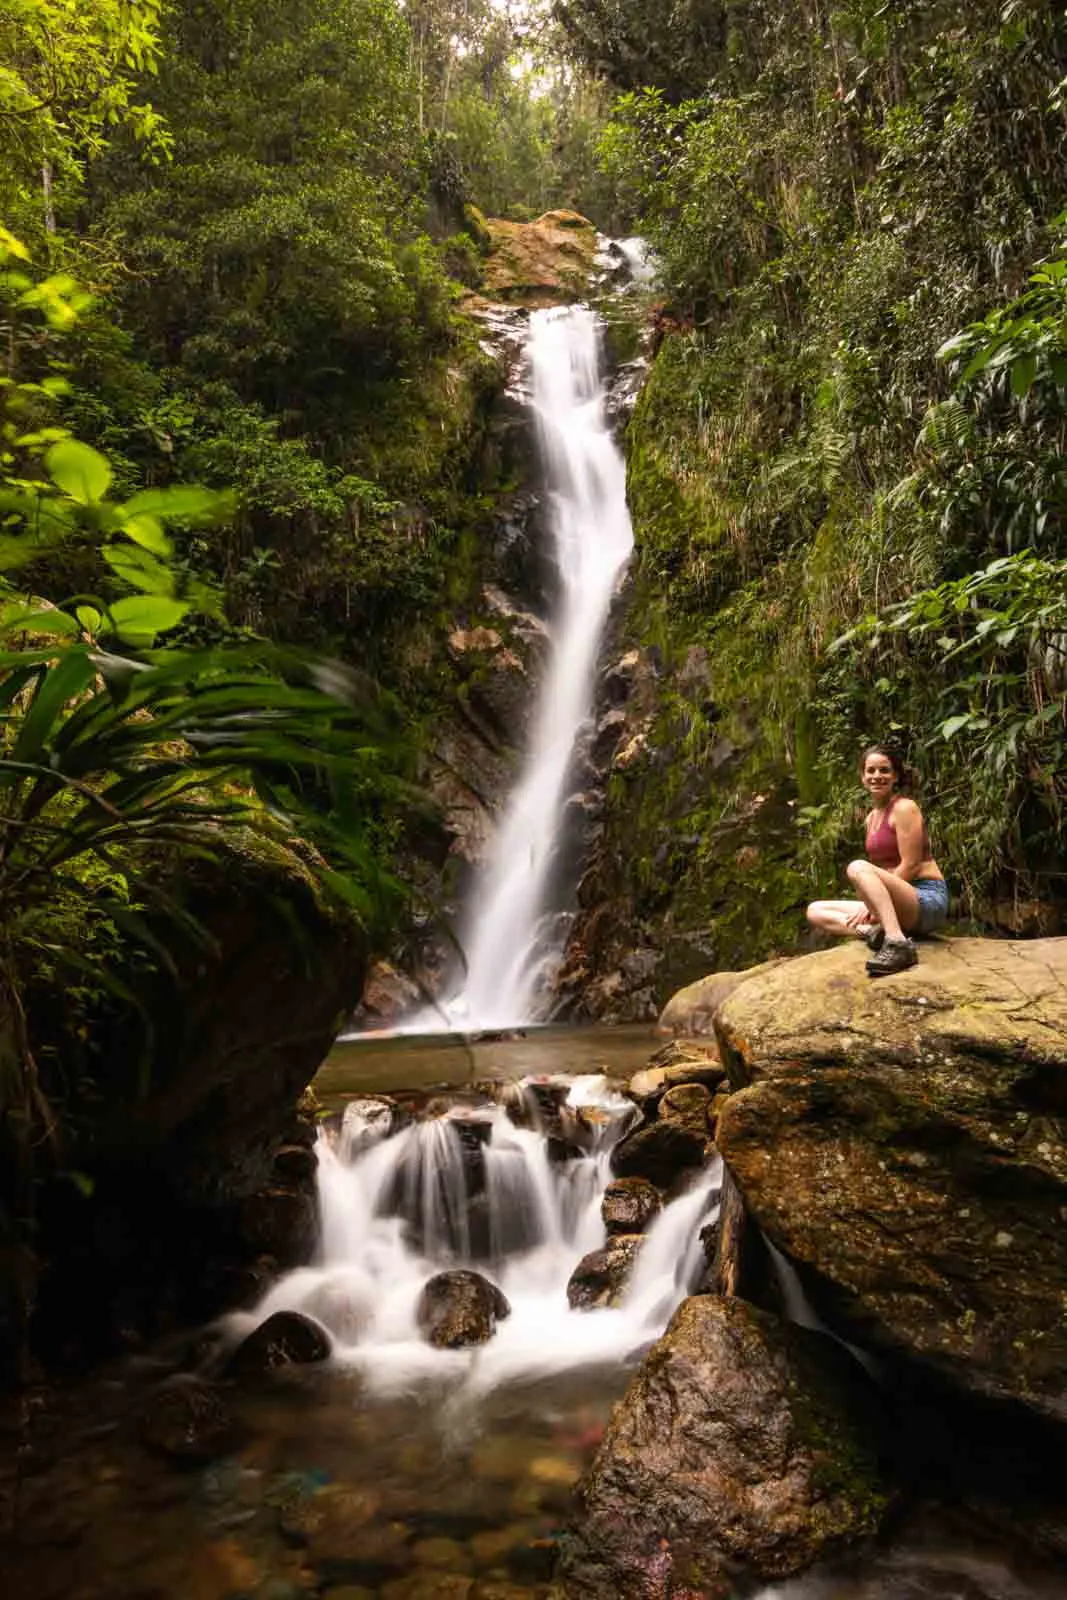 You'll love hiking to the many waterfalls on your day trip from Medellin.